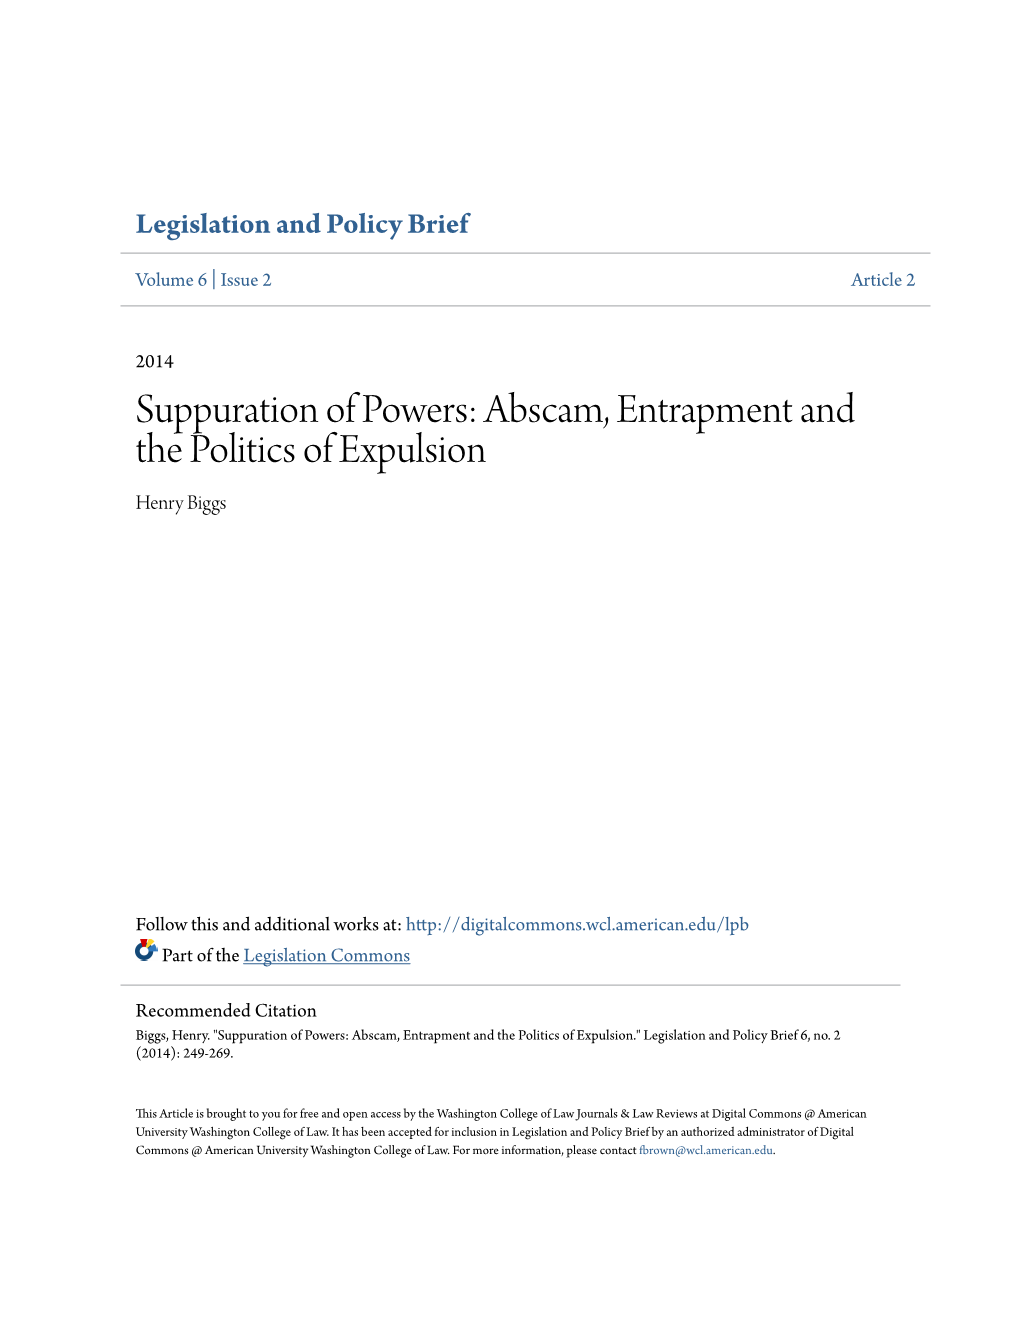 Suppuration of Powers: Abscam, Entrapment and the Politics of Expulsion Henry Biggs